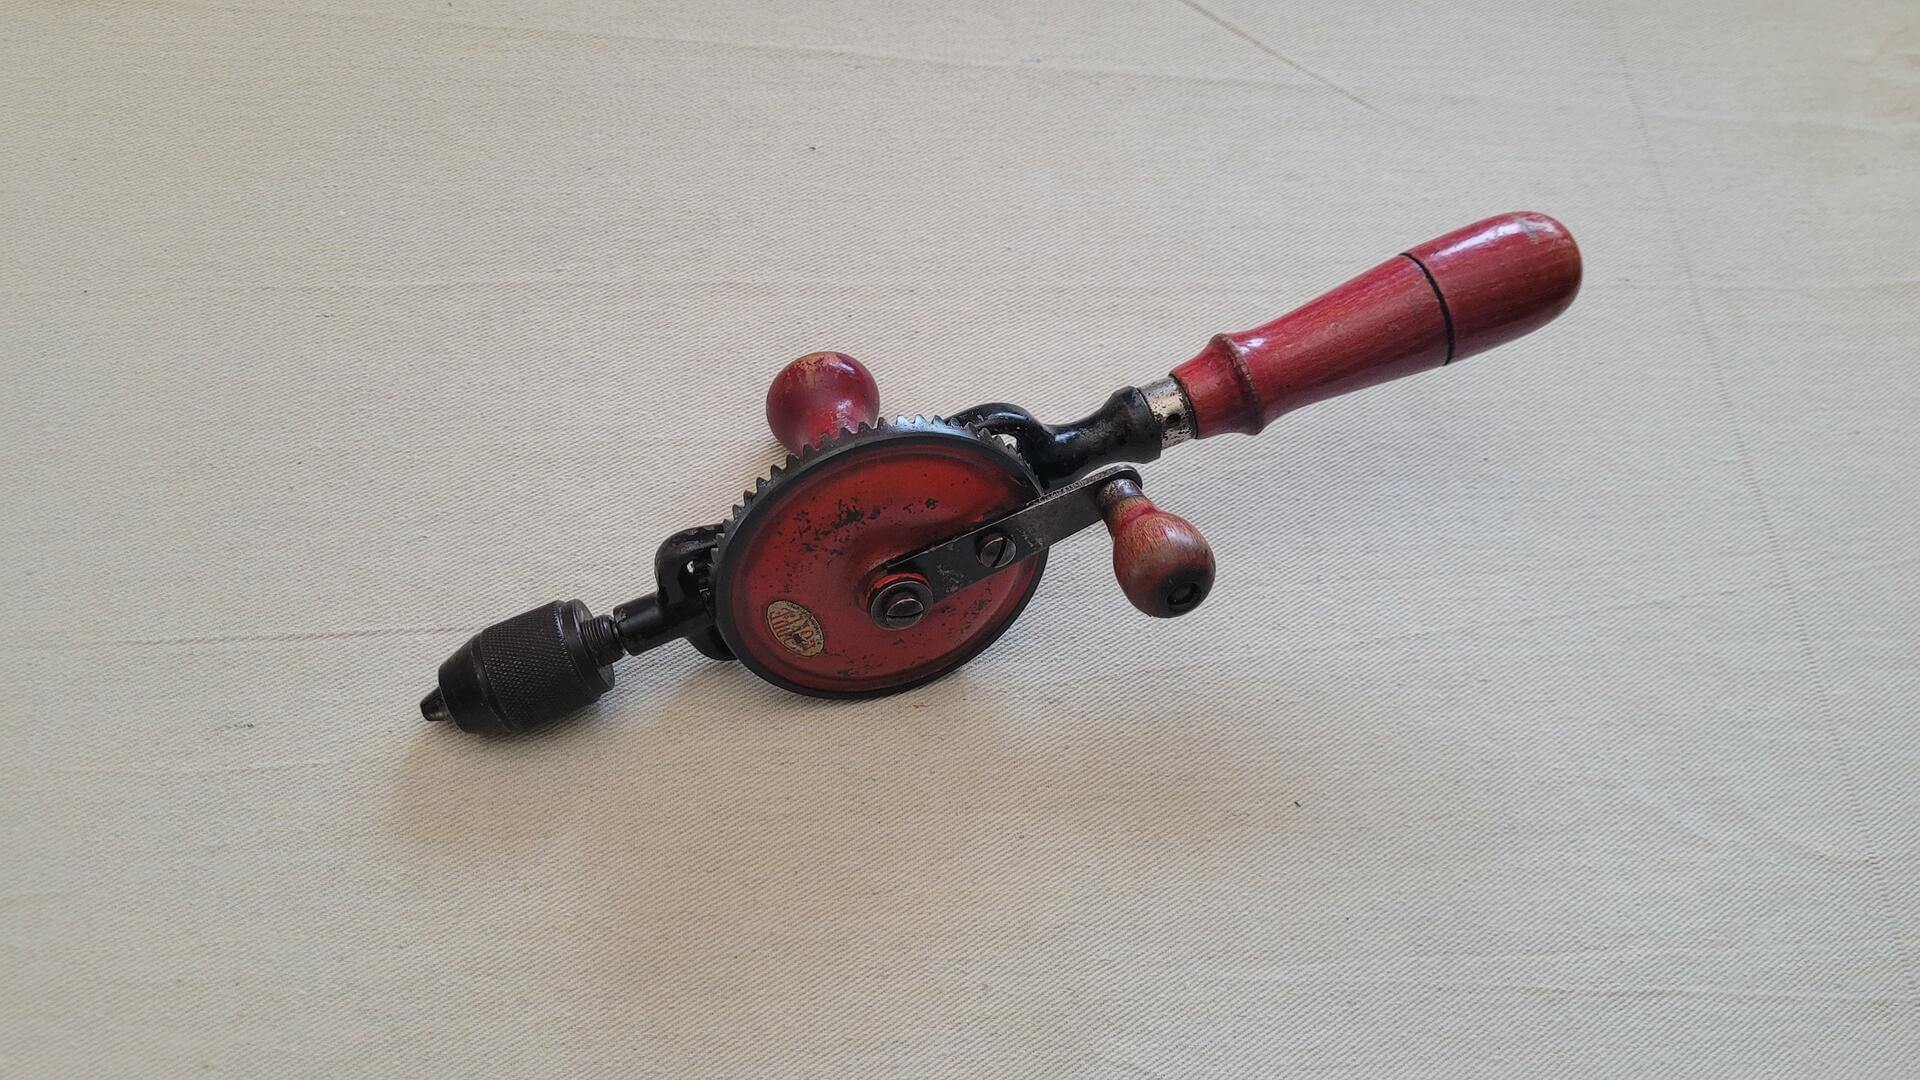 Vintage woodworking Hoppe egg beater style hand drill with red wooden handle. Rare antique made in Germany collectible carpentry hand tool